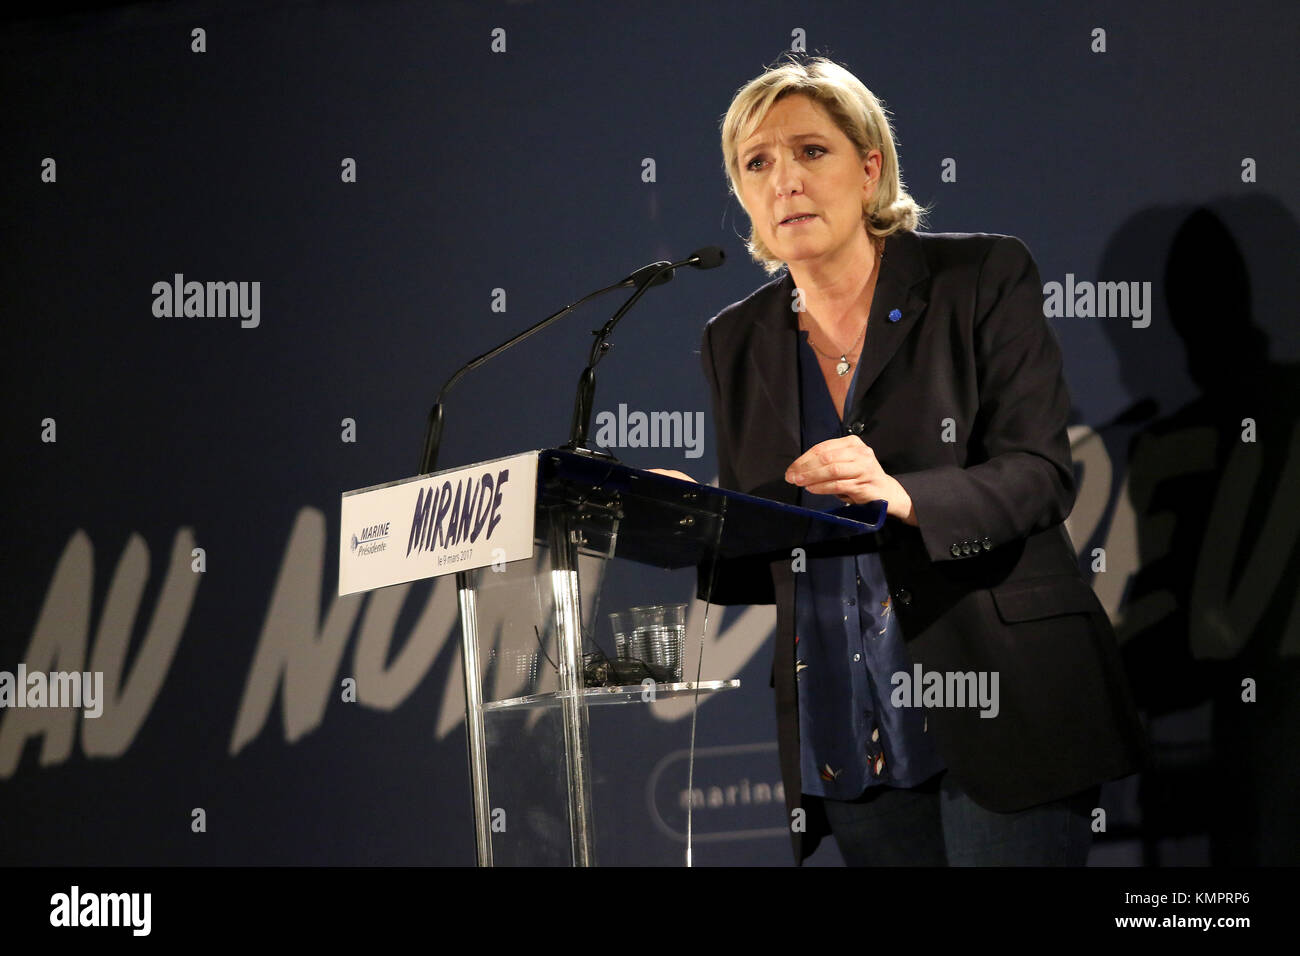 Mirande (France) March, 09 2017 ;Meeting of  Marine LE PEN candidate of the far-right Front National for french presidential election of Mirande Stock Photo